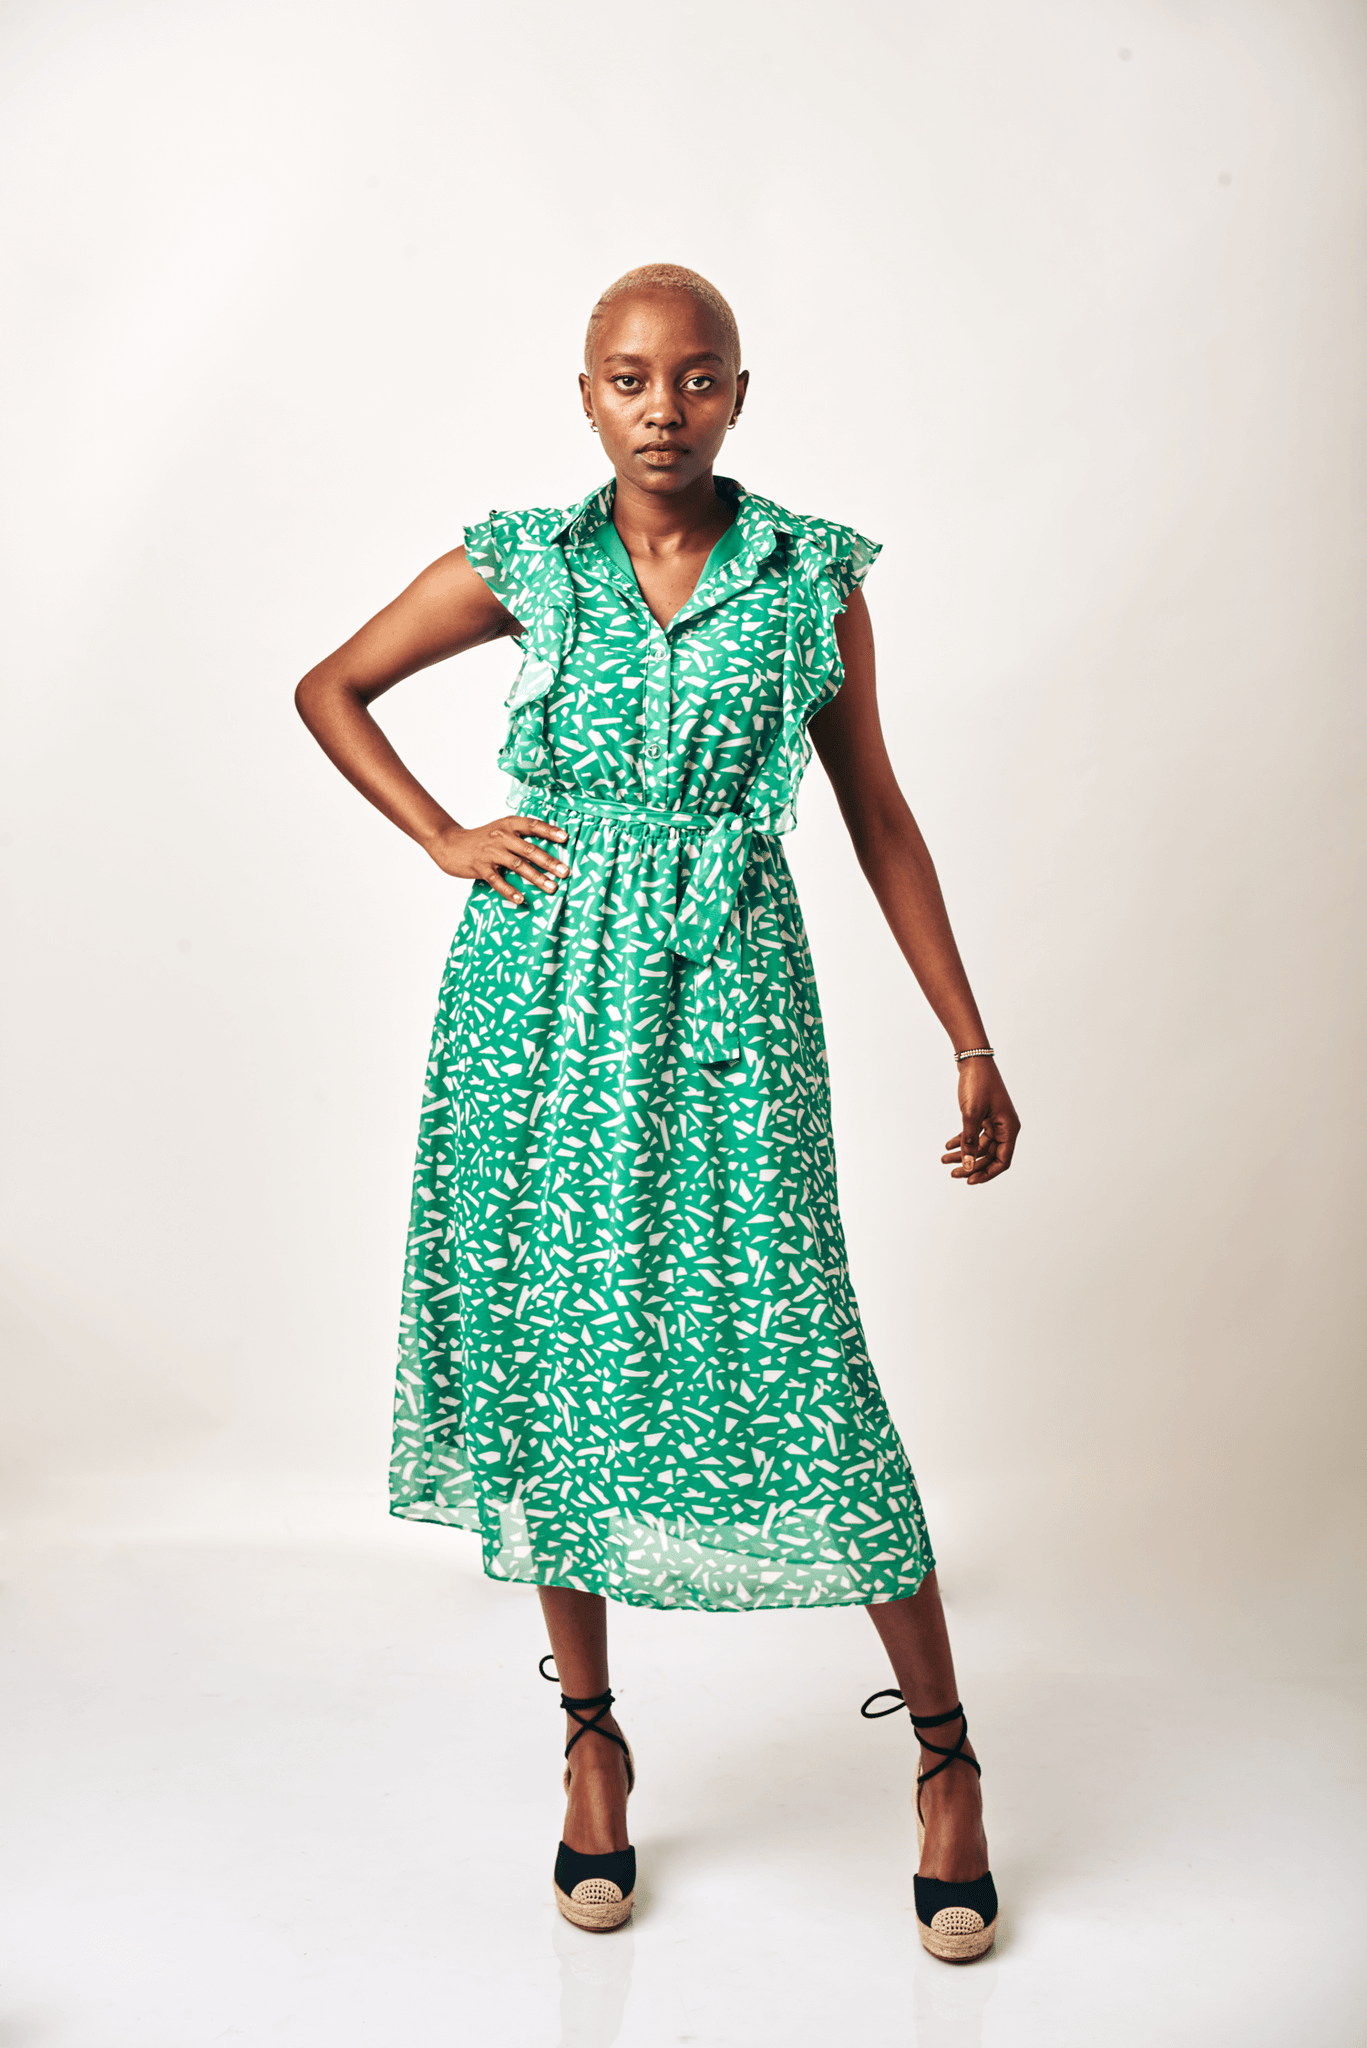 Shop the New Arrivals Collection on Arrai. Discover stylish, affordable clothing, jewelry, handbags and unique handmade pieces from top Kenyan & African fashion brands prioritising sustainability and quality craftsmanship. Shop Fashion online on Arrai.sho